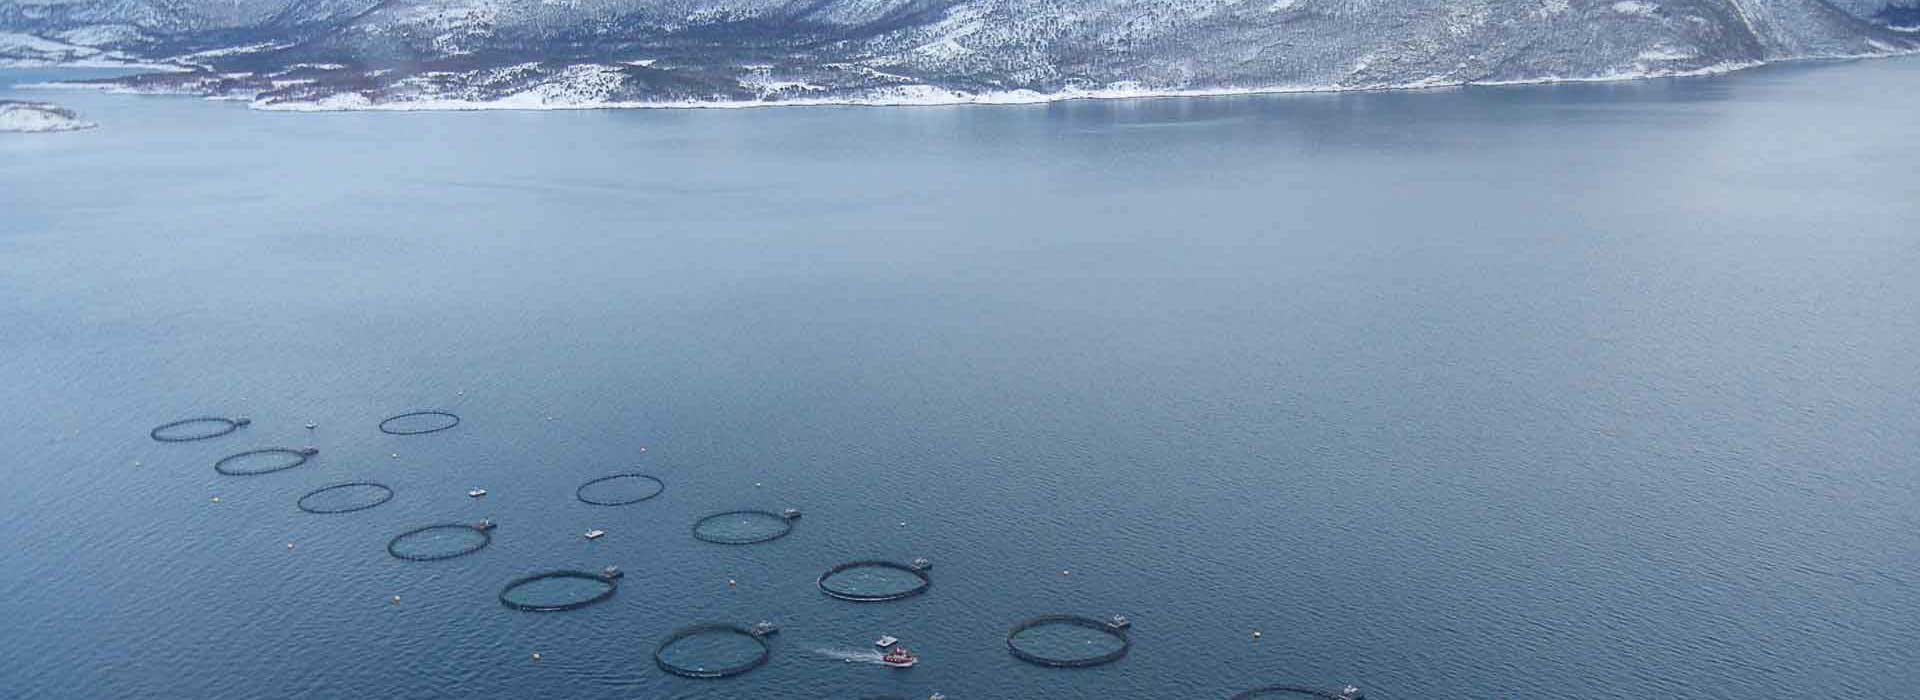 Alltech Aquaculture | Working Together for a Planet of Plenty